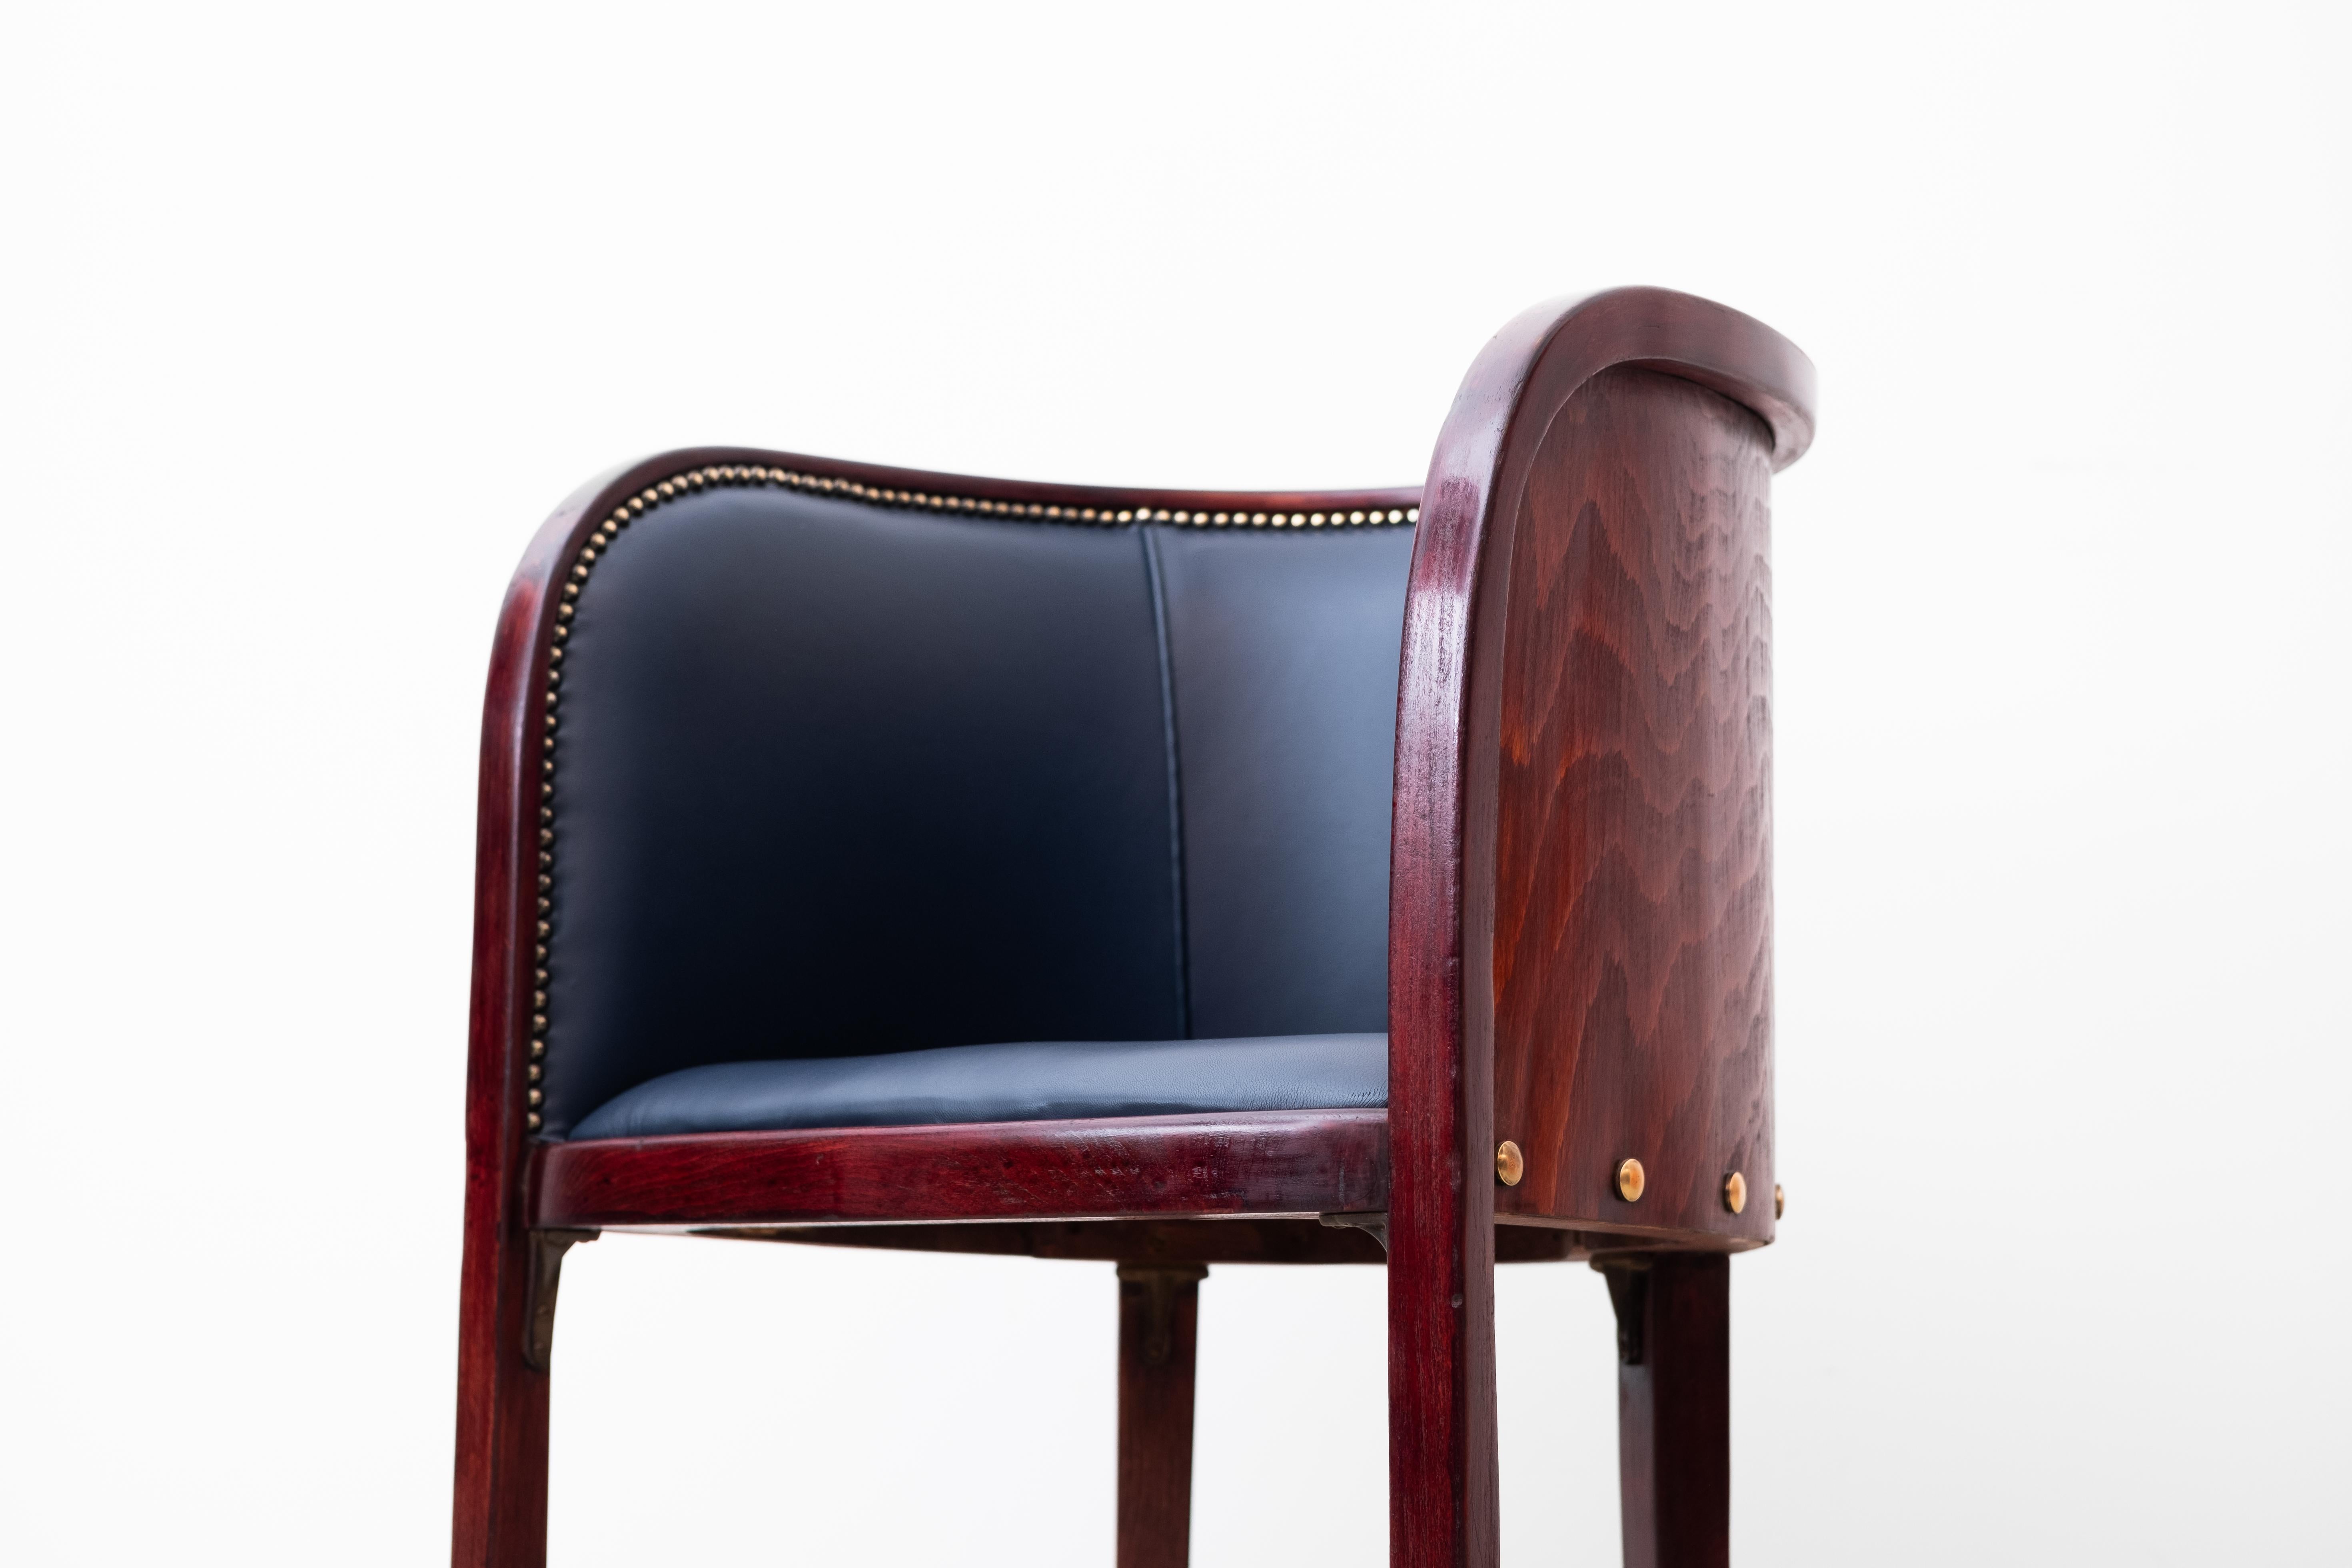 Secession Armchair by Josef Hoffmann (1914), manufactured by Thonet (1919) 1